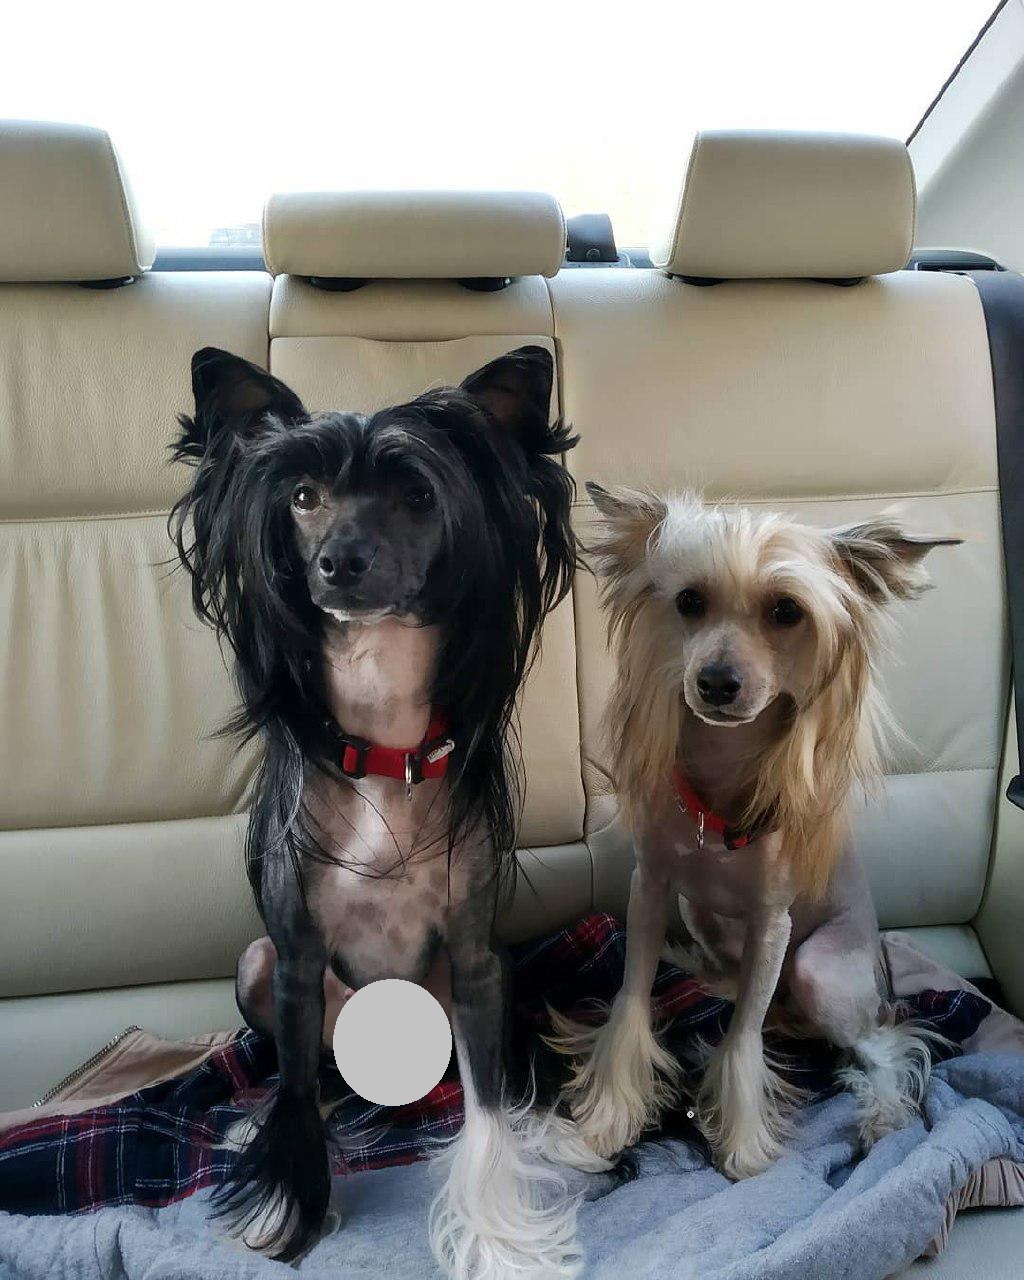 A black and white Chinese Crested sitting in the backseat